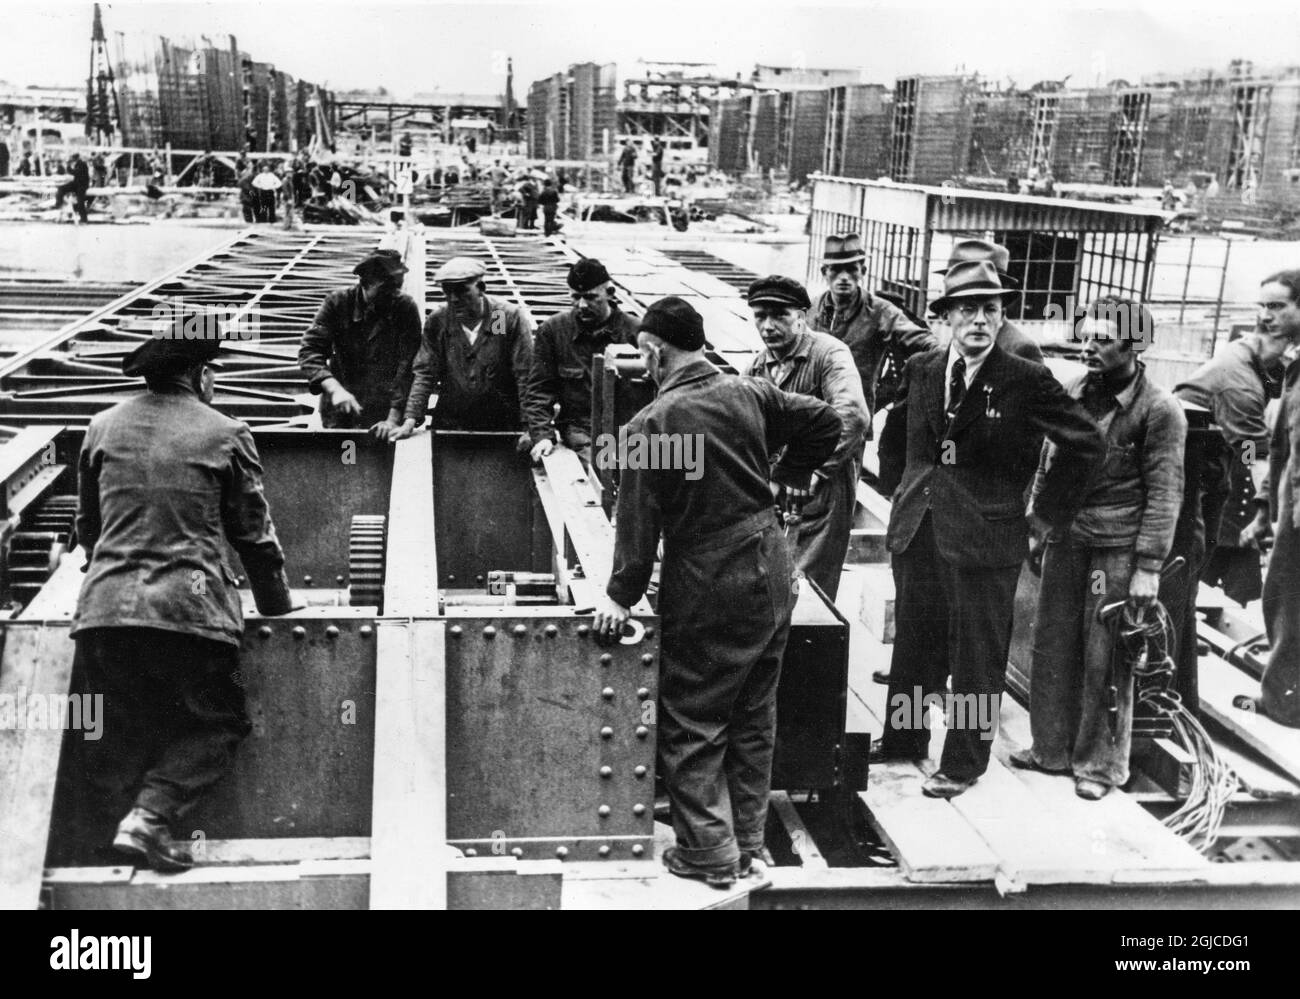 ATLANTIC COAST, FRANCE 1943-04-29 Workers ('from all parts of the Kontinent2, according to German caption), building fortifications in the Atlantic Wall April 29, 1943, during the German occupation of parts of France during the Second World War. Photo: Weinbach / AB Text & Bilder / Scherl Bilderdienst / SVT / Kod: 5600  Stock Photo